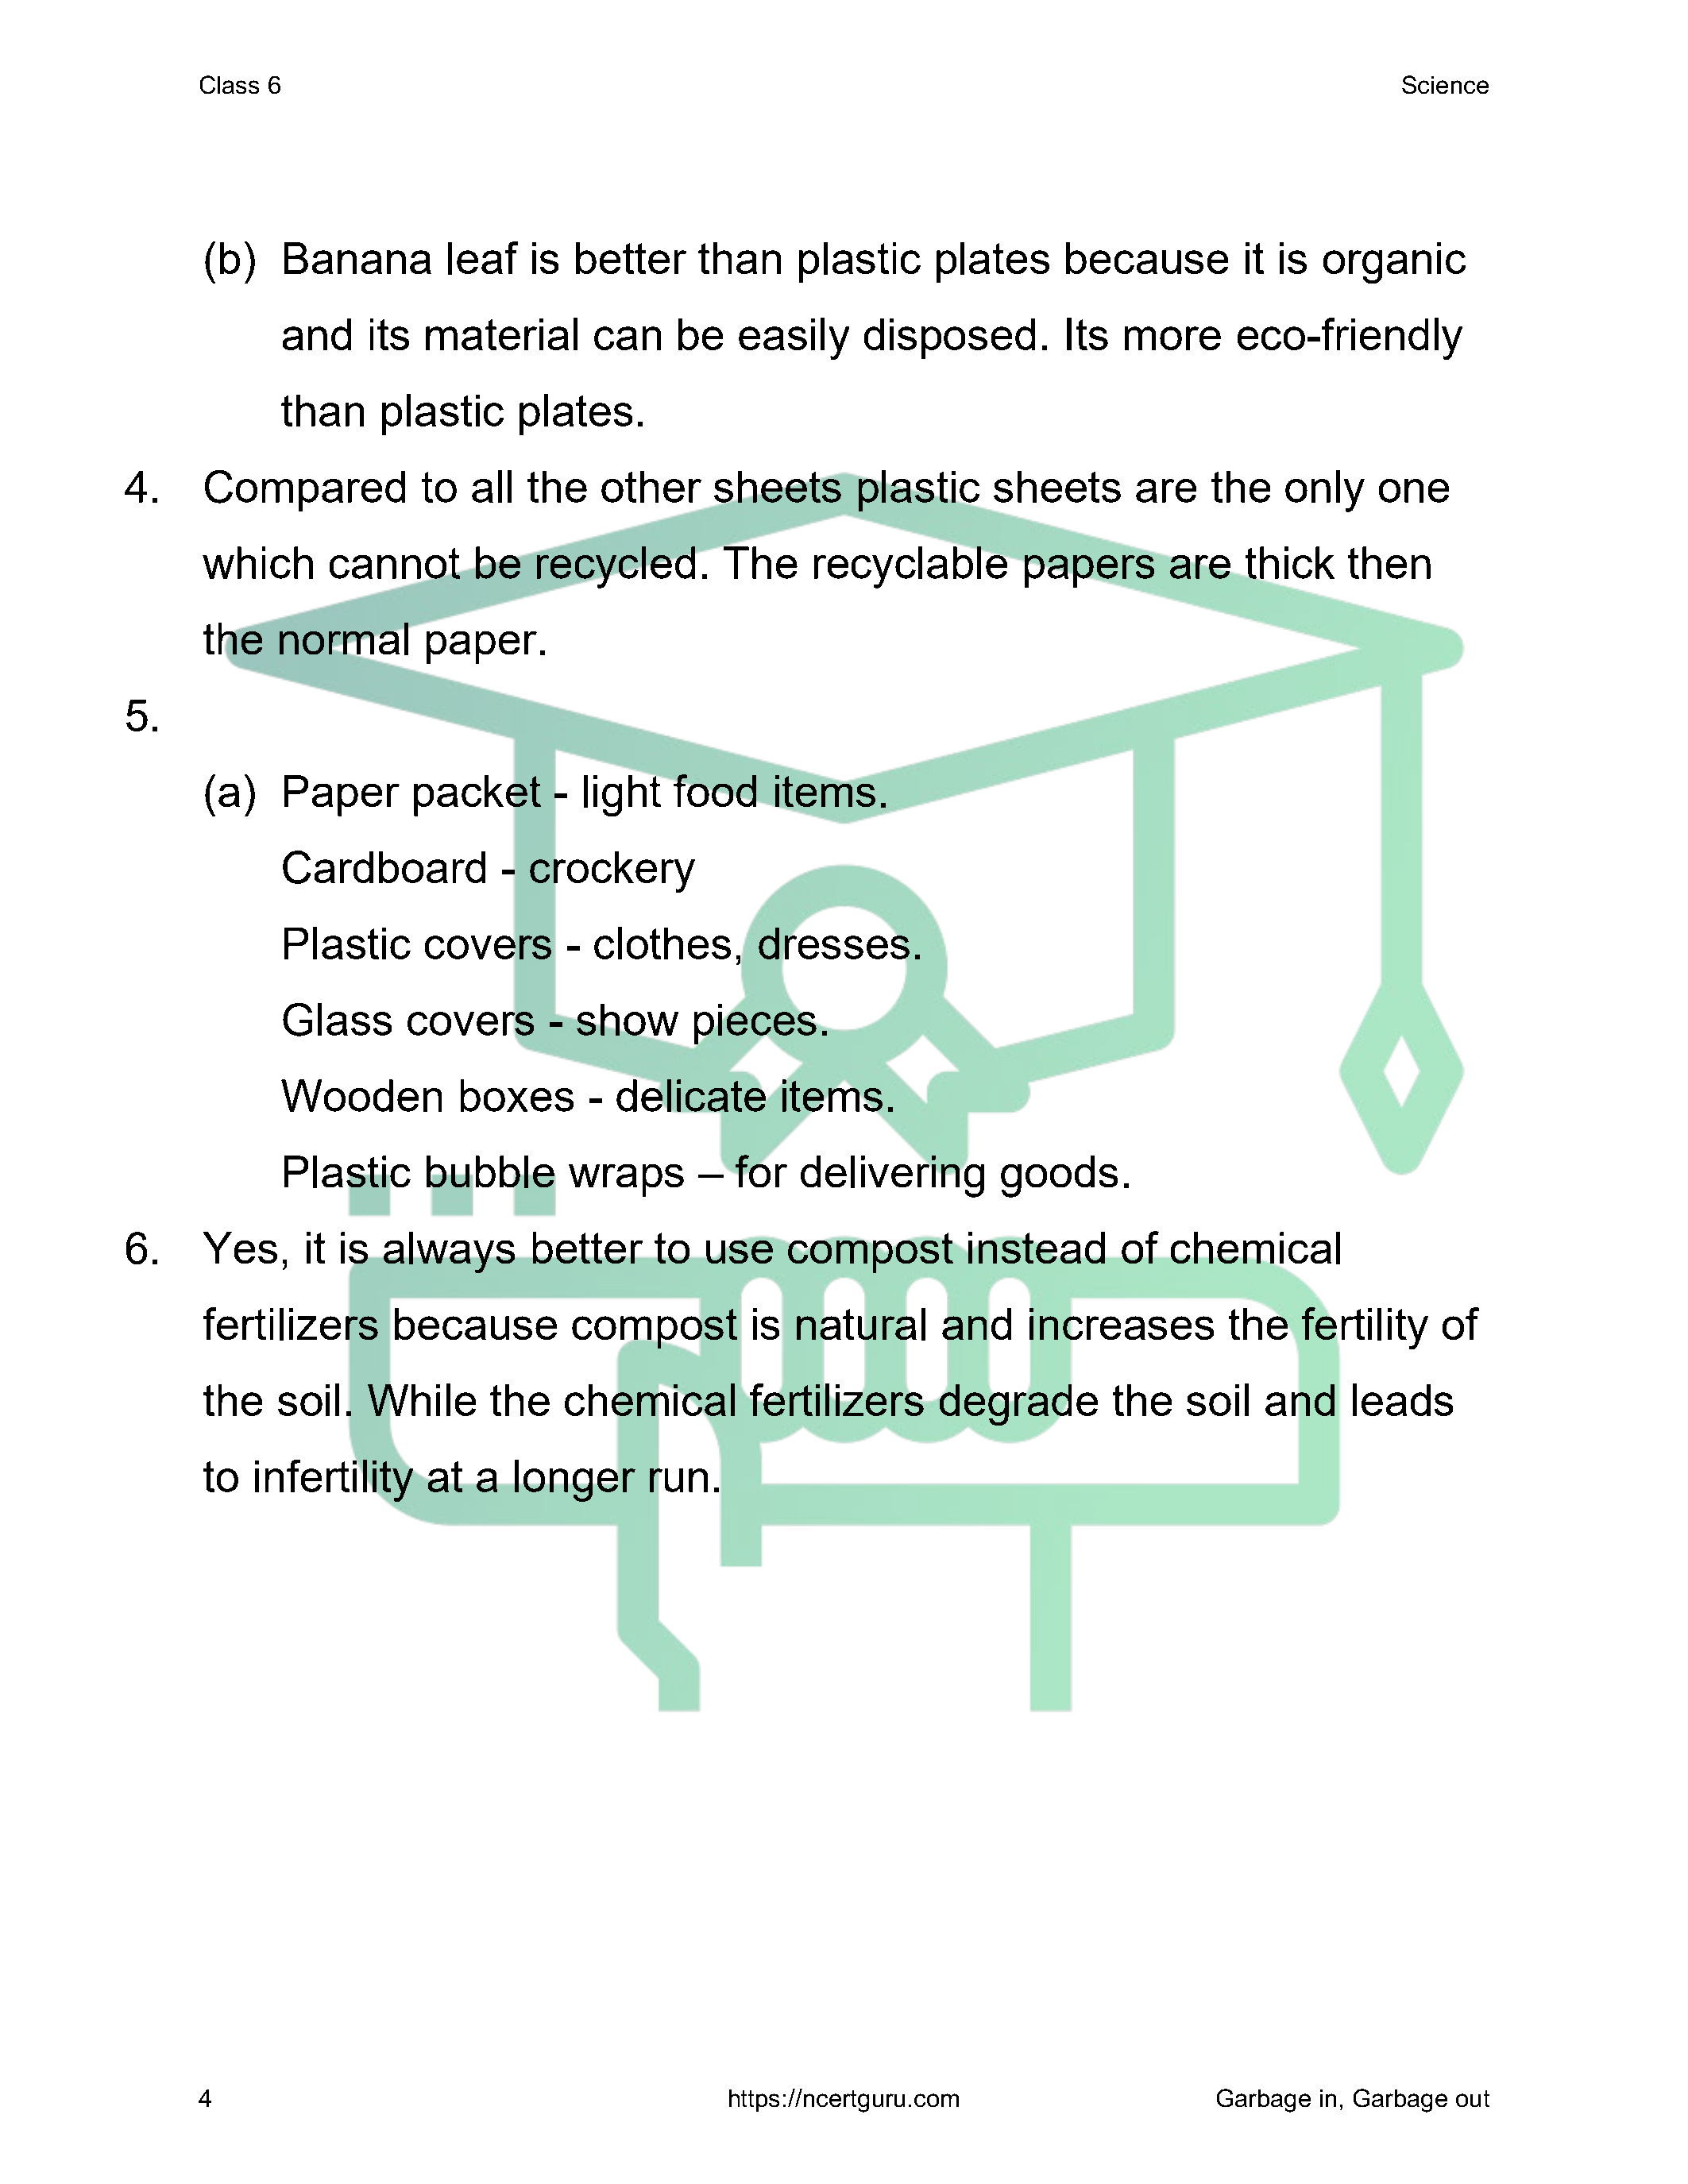 NCERT Solutions for Class 6 science Chapter 16